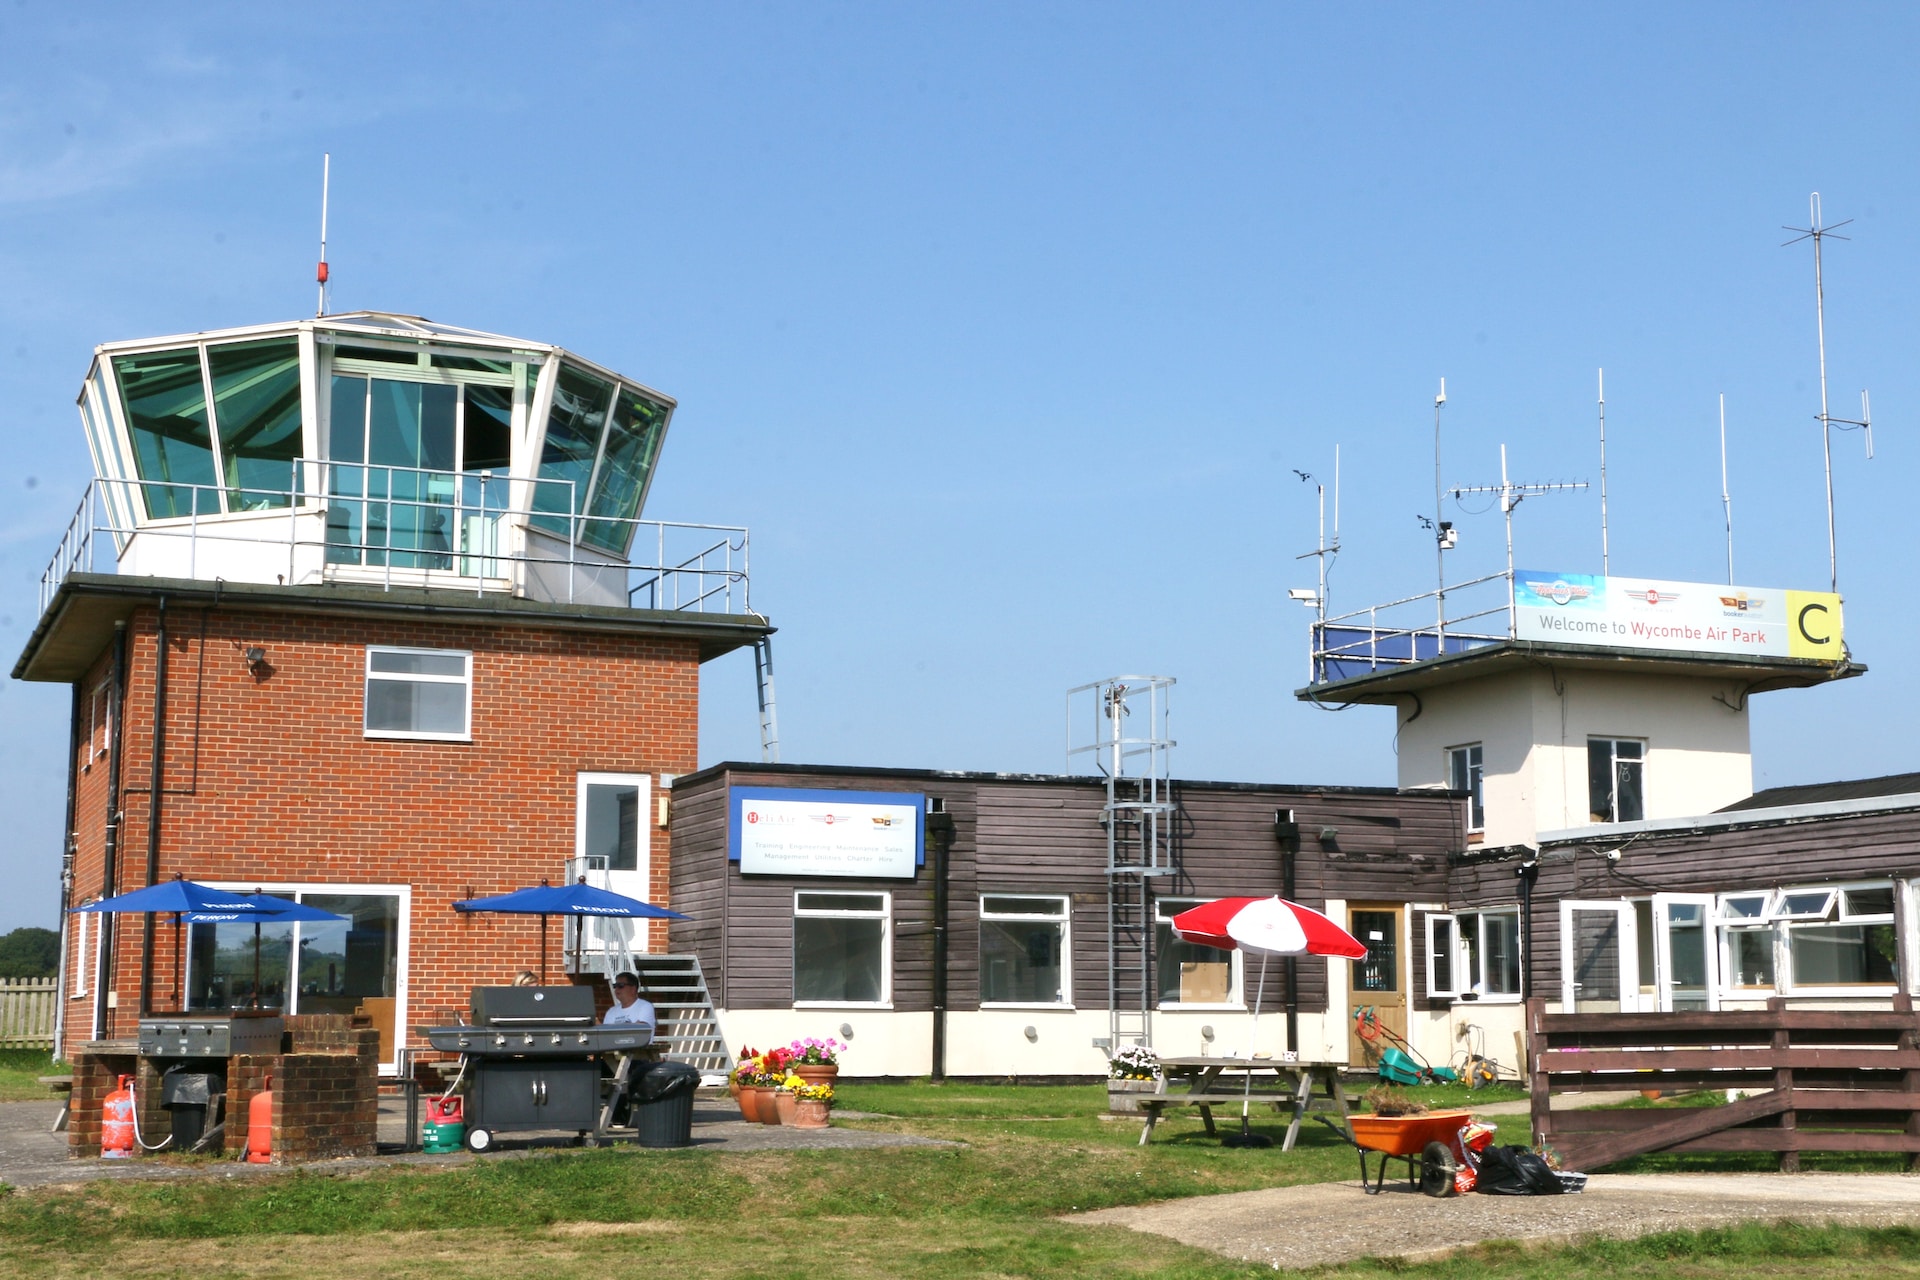 The Importance of Air Traffic Control for Light Aircraft Pilots